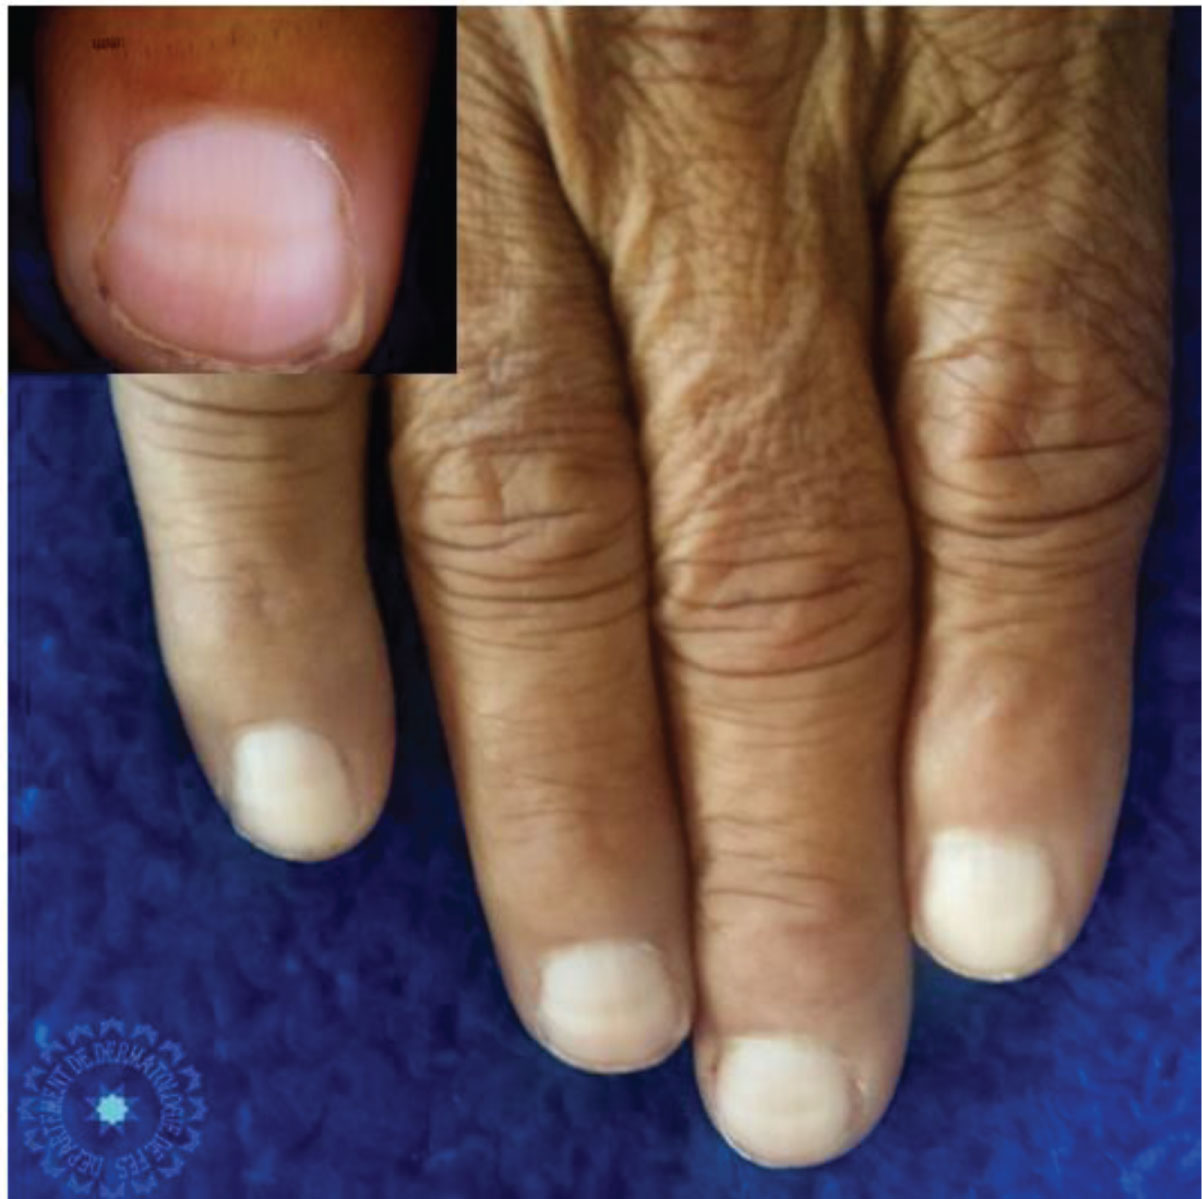 Nail signs of systemic diseases 指甲症狀與全身性疾病@ 快樂小藥師Im pharmacist nichts  glücklich :: 痞客邦::